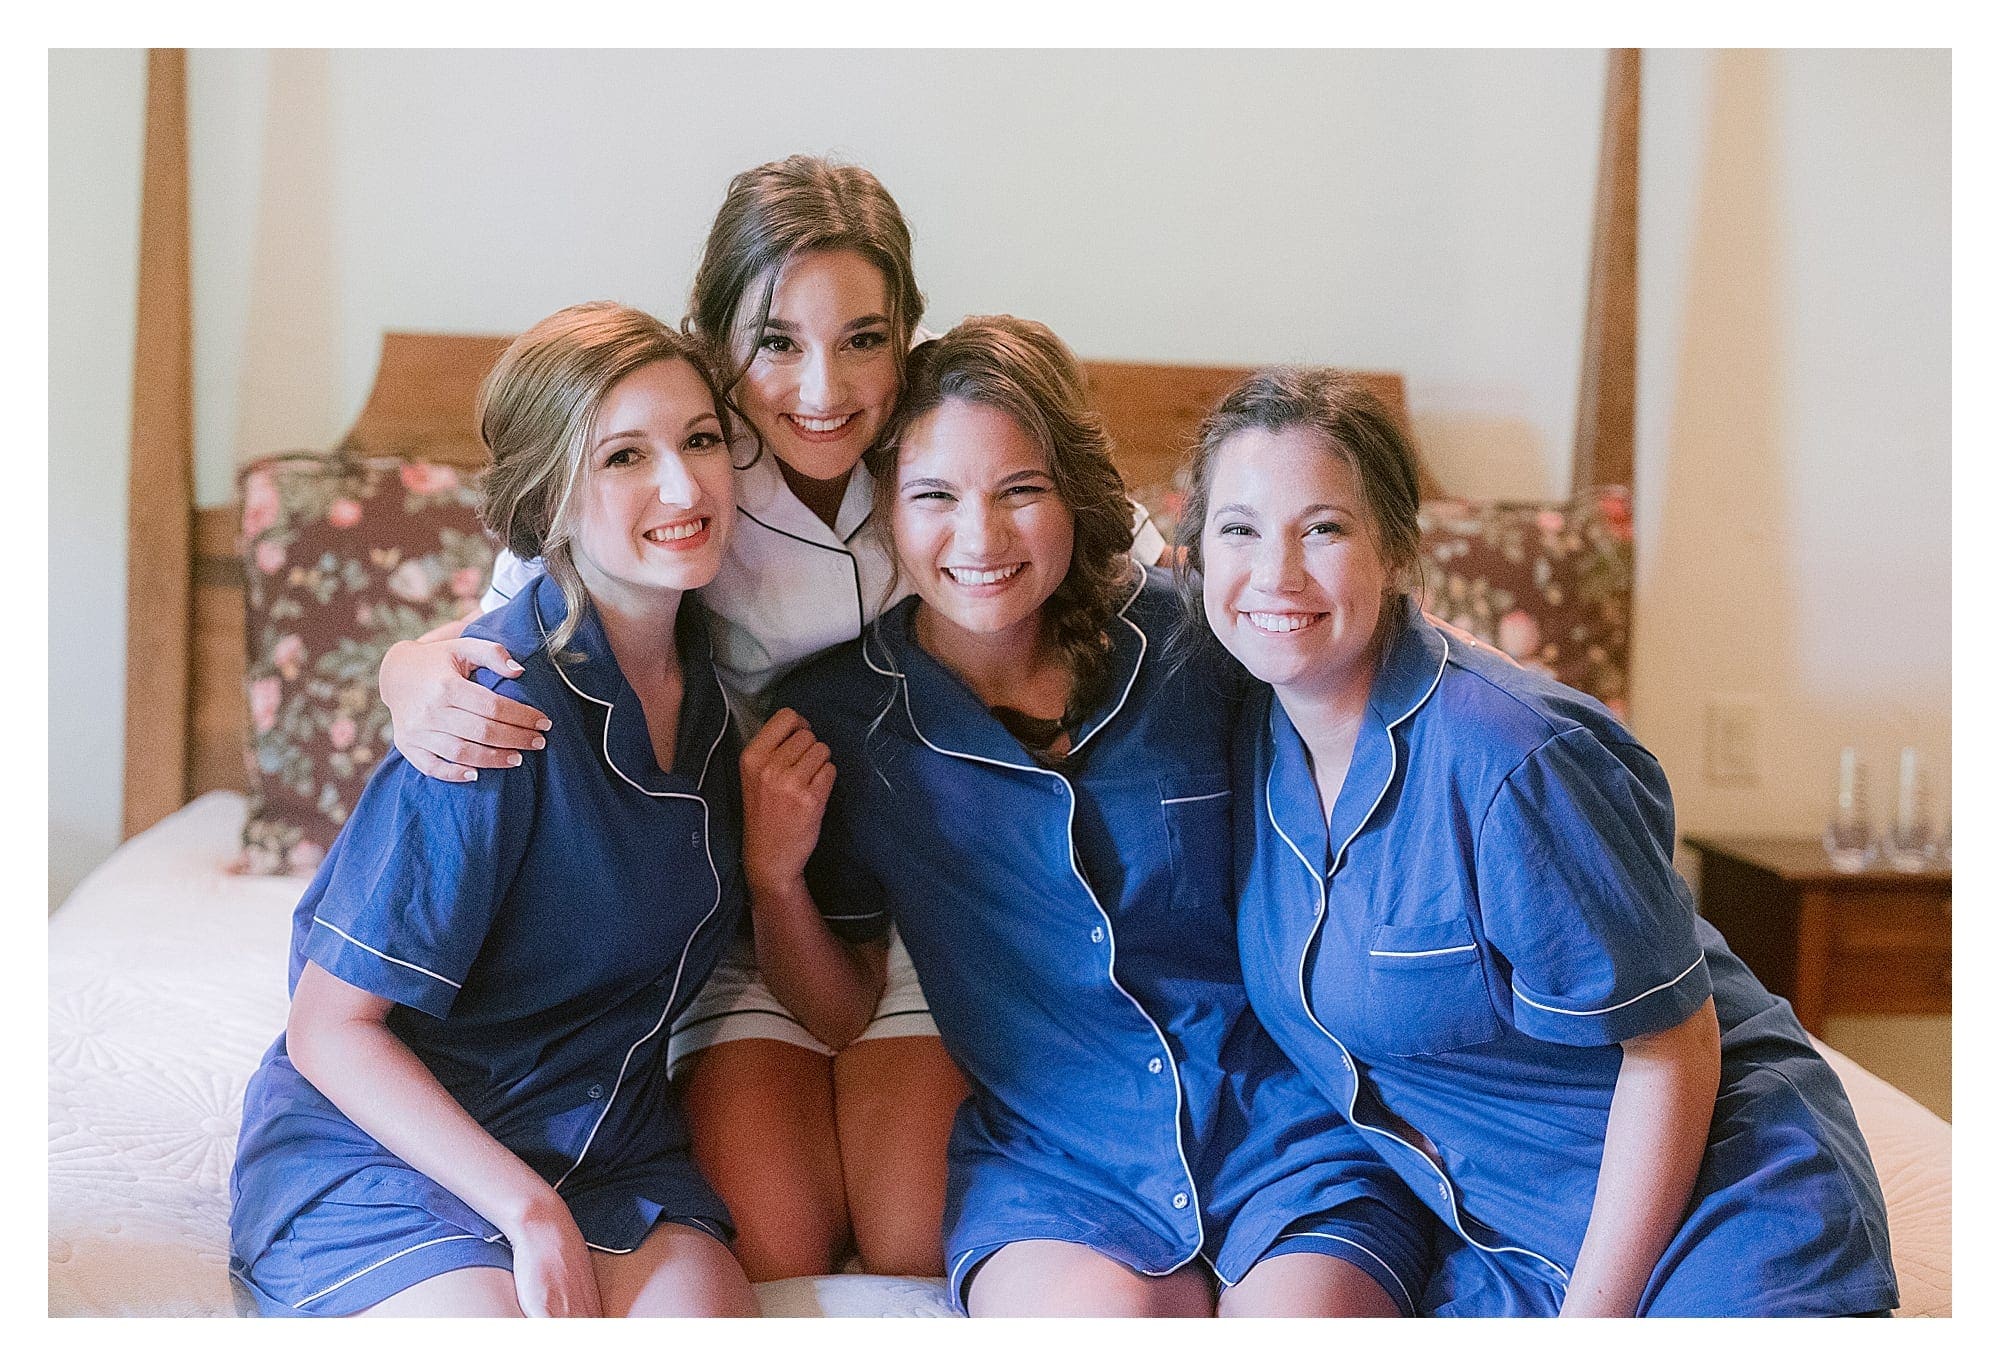 Bride and bridesmaids in matching pyjama sets before putting dresses on